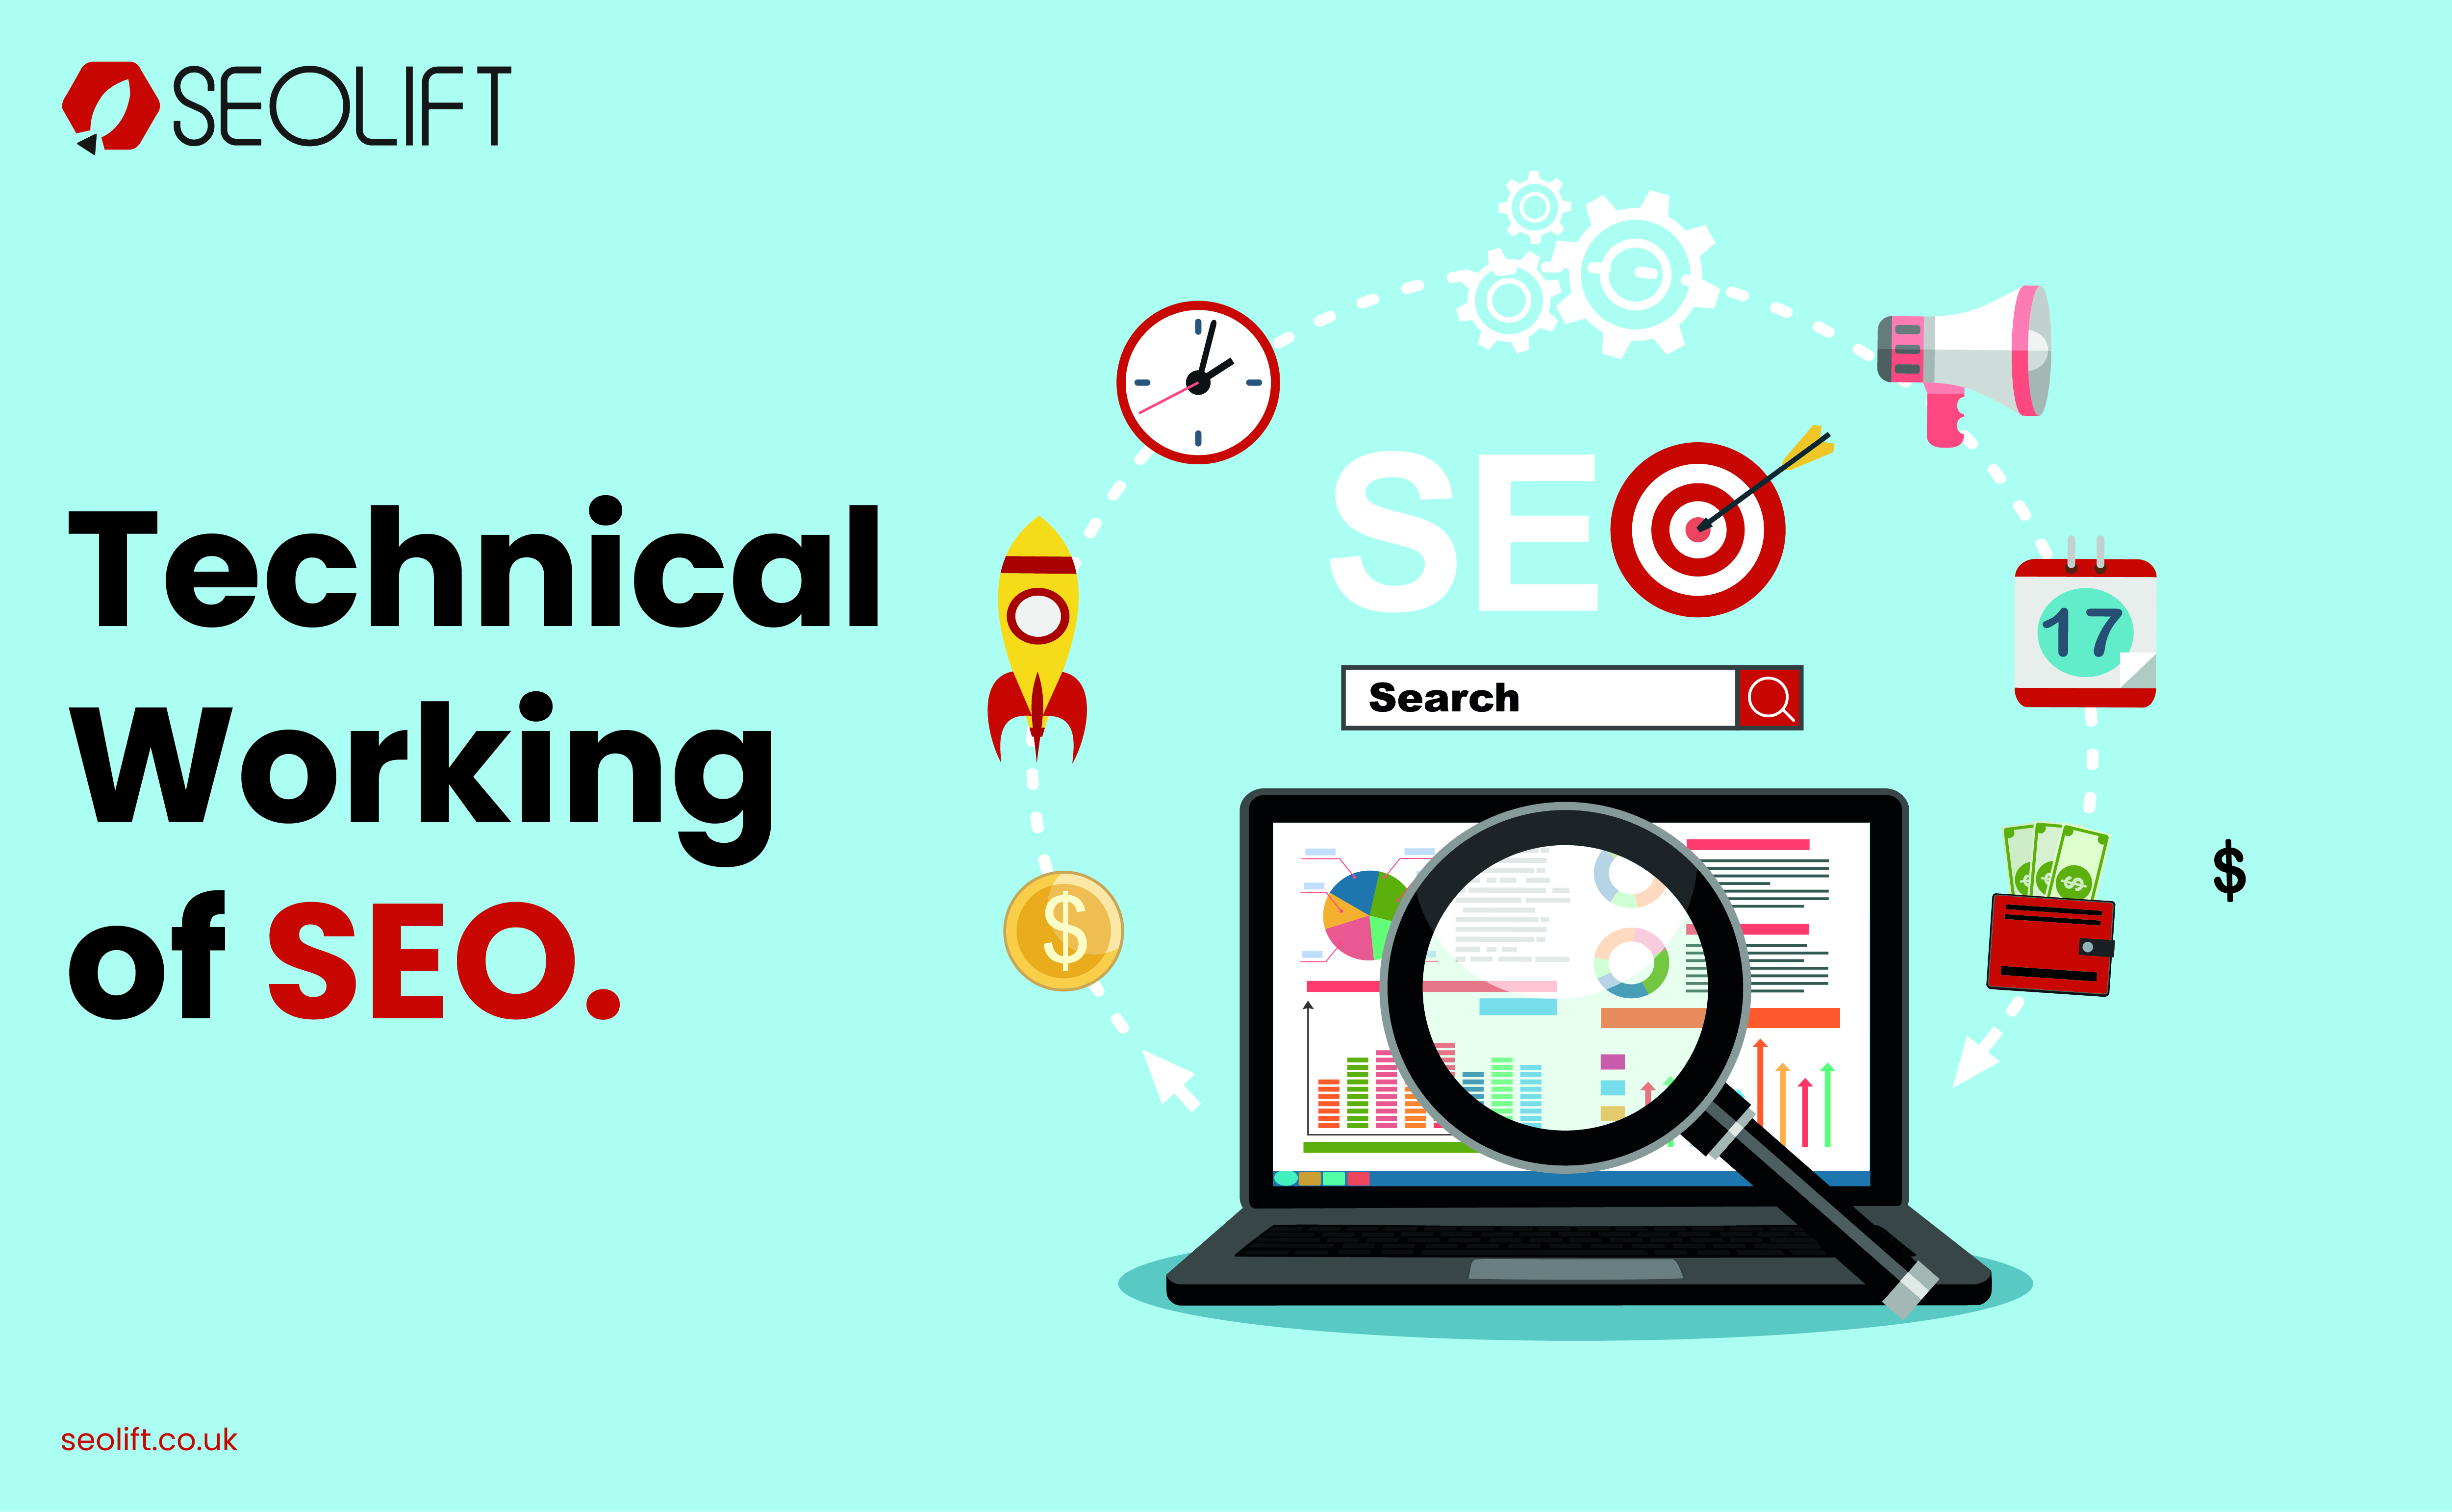 Technical Working of SEO